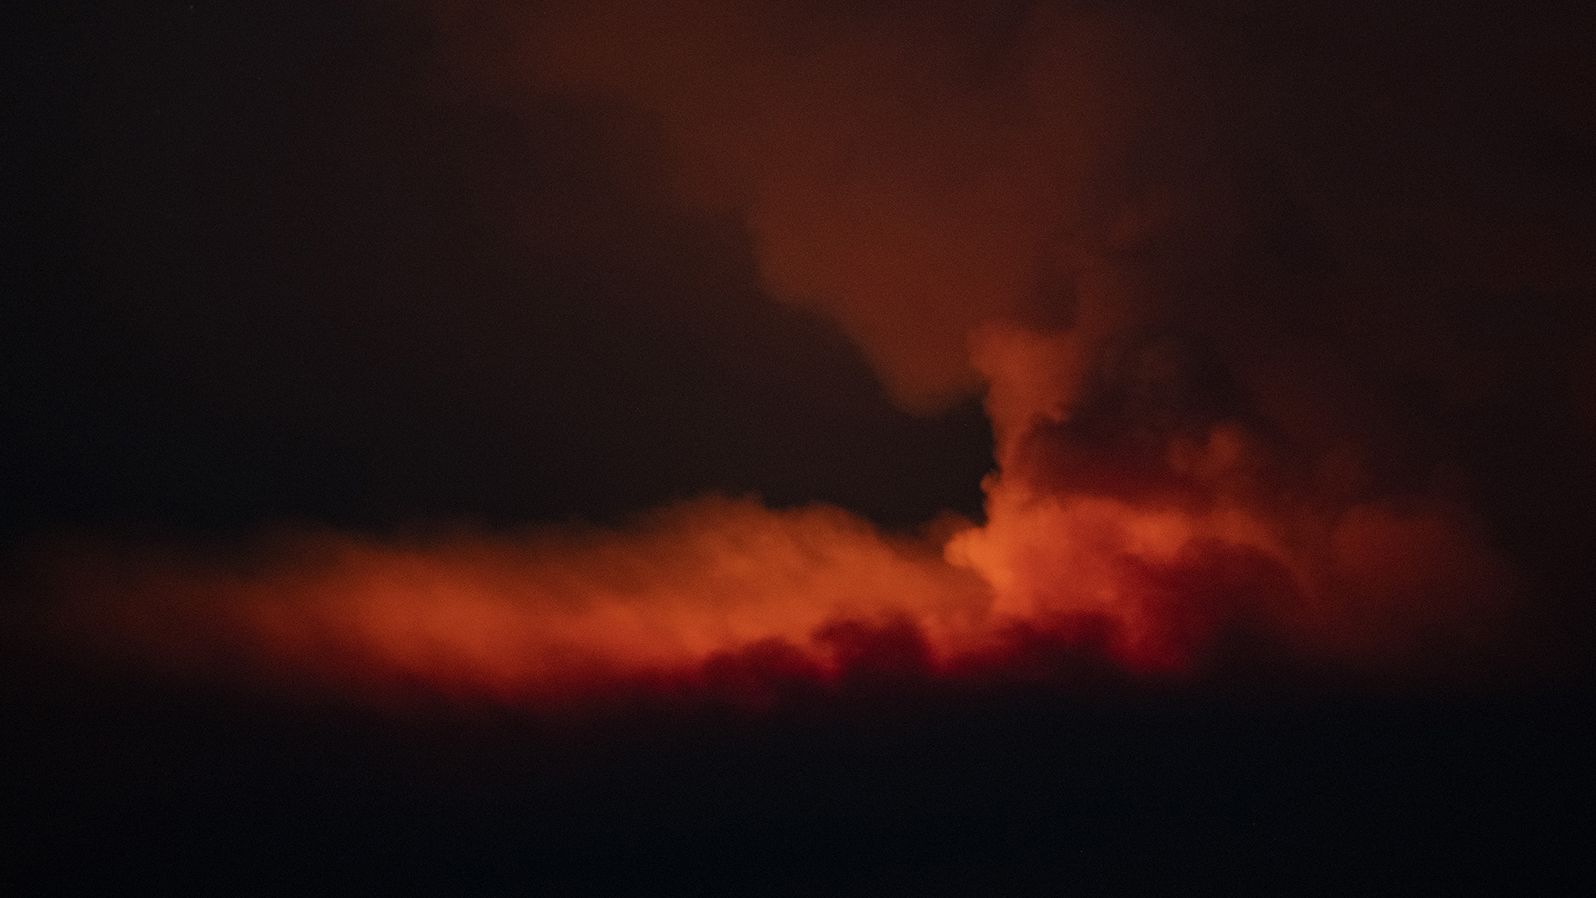 The Bootleg Fire illuminates the sky at night near Bly in Oregon on July 16.